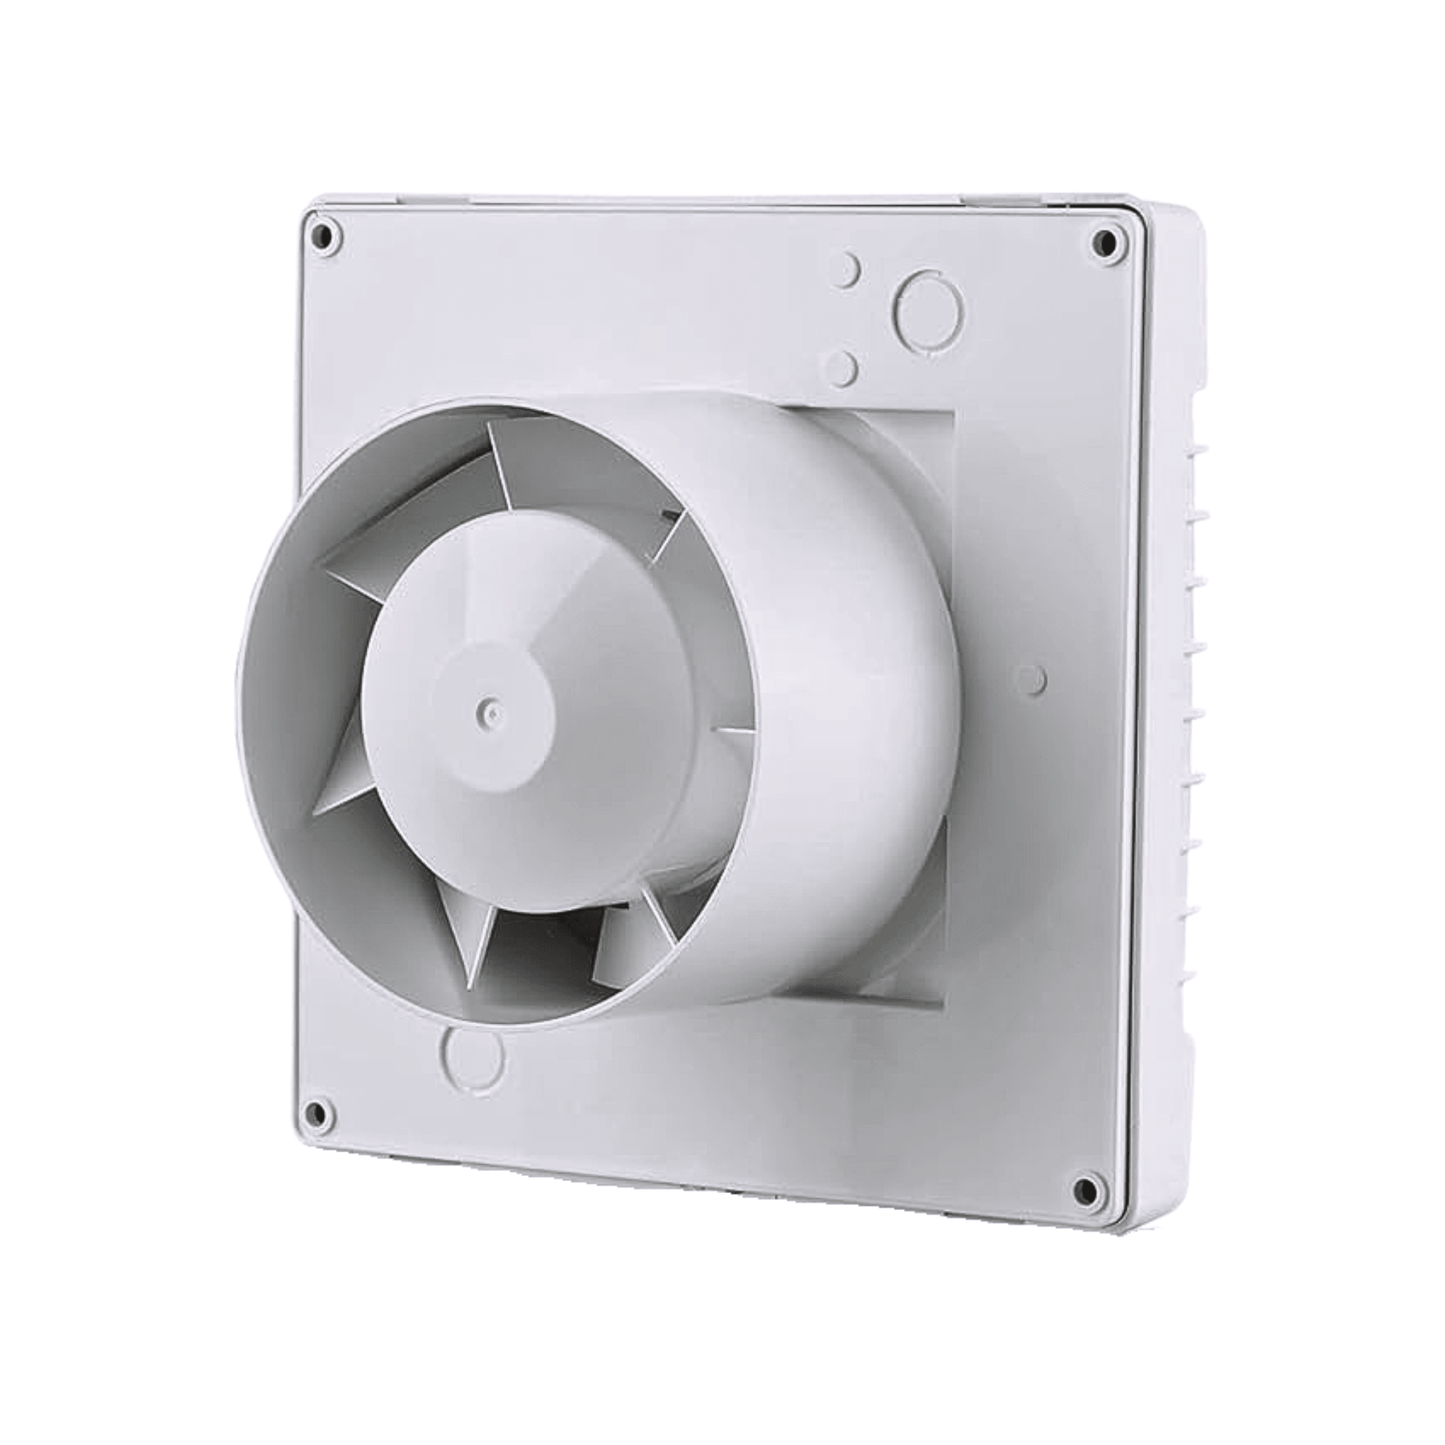 Vents 150 MA Axial Extract Fan